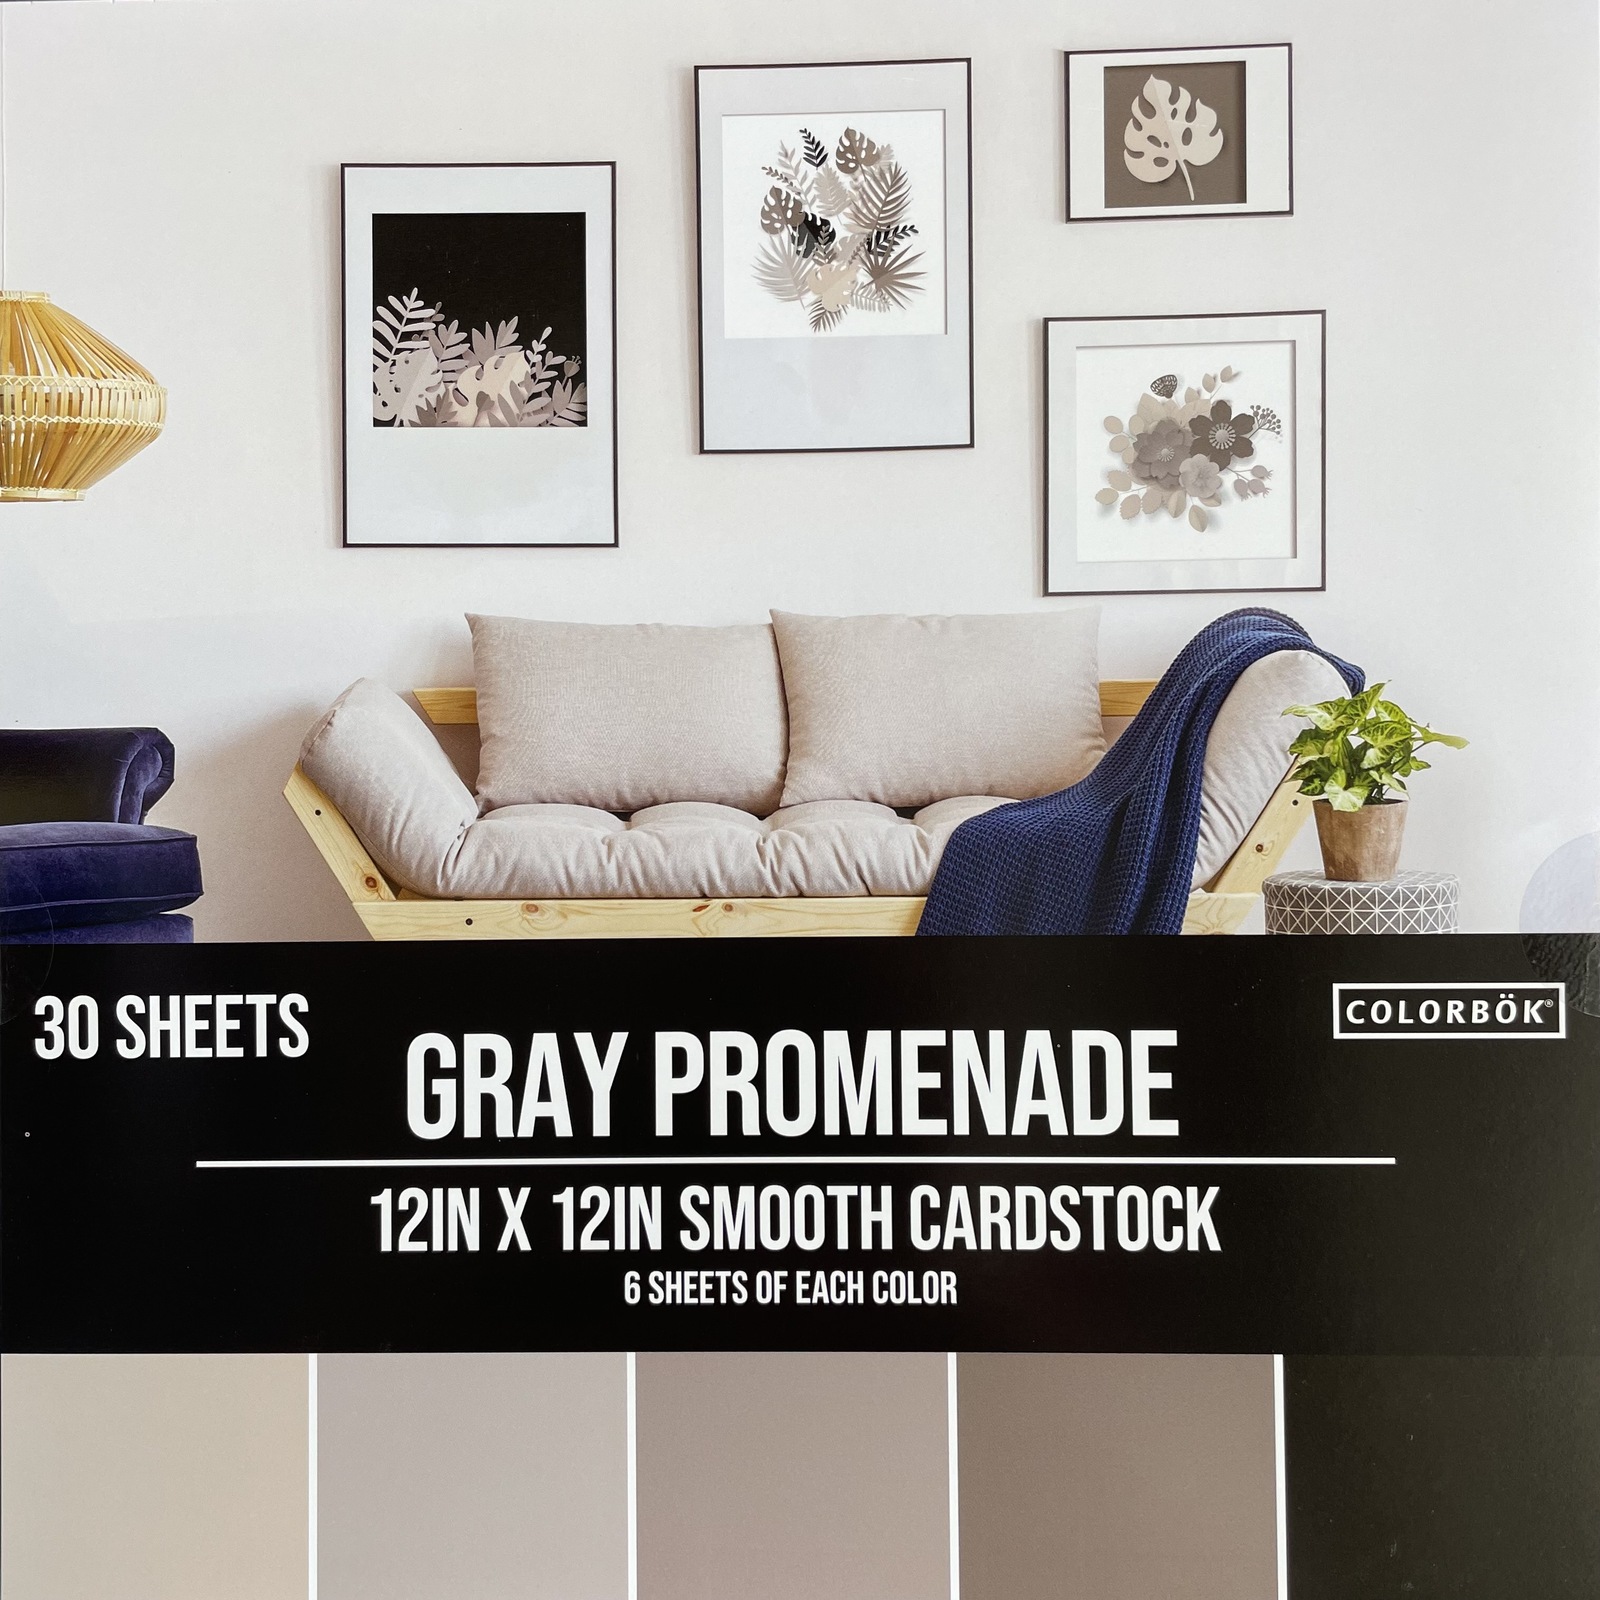 Colorbok 210gsm Smooth Cardstock 12x12 30 Pack Gray Promenade